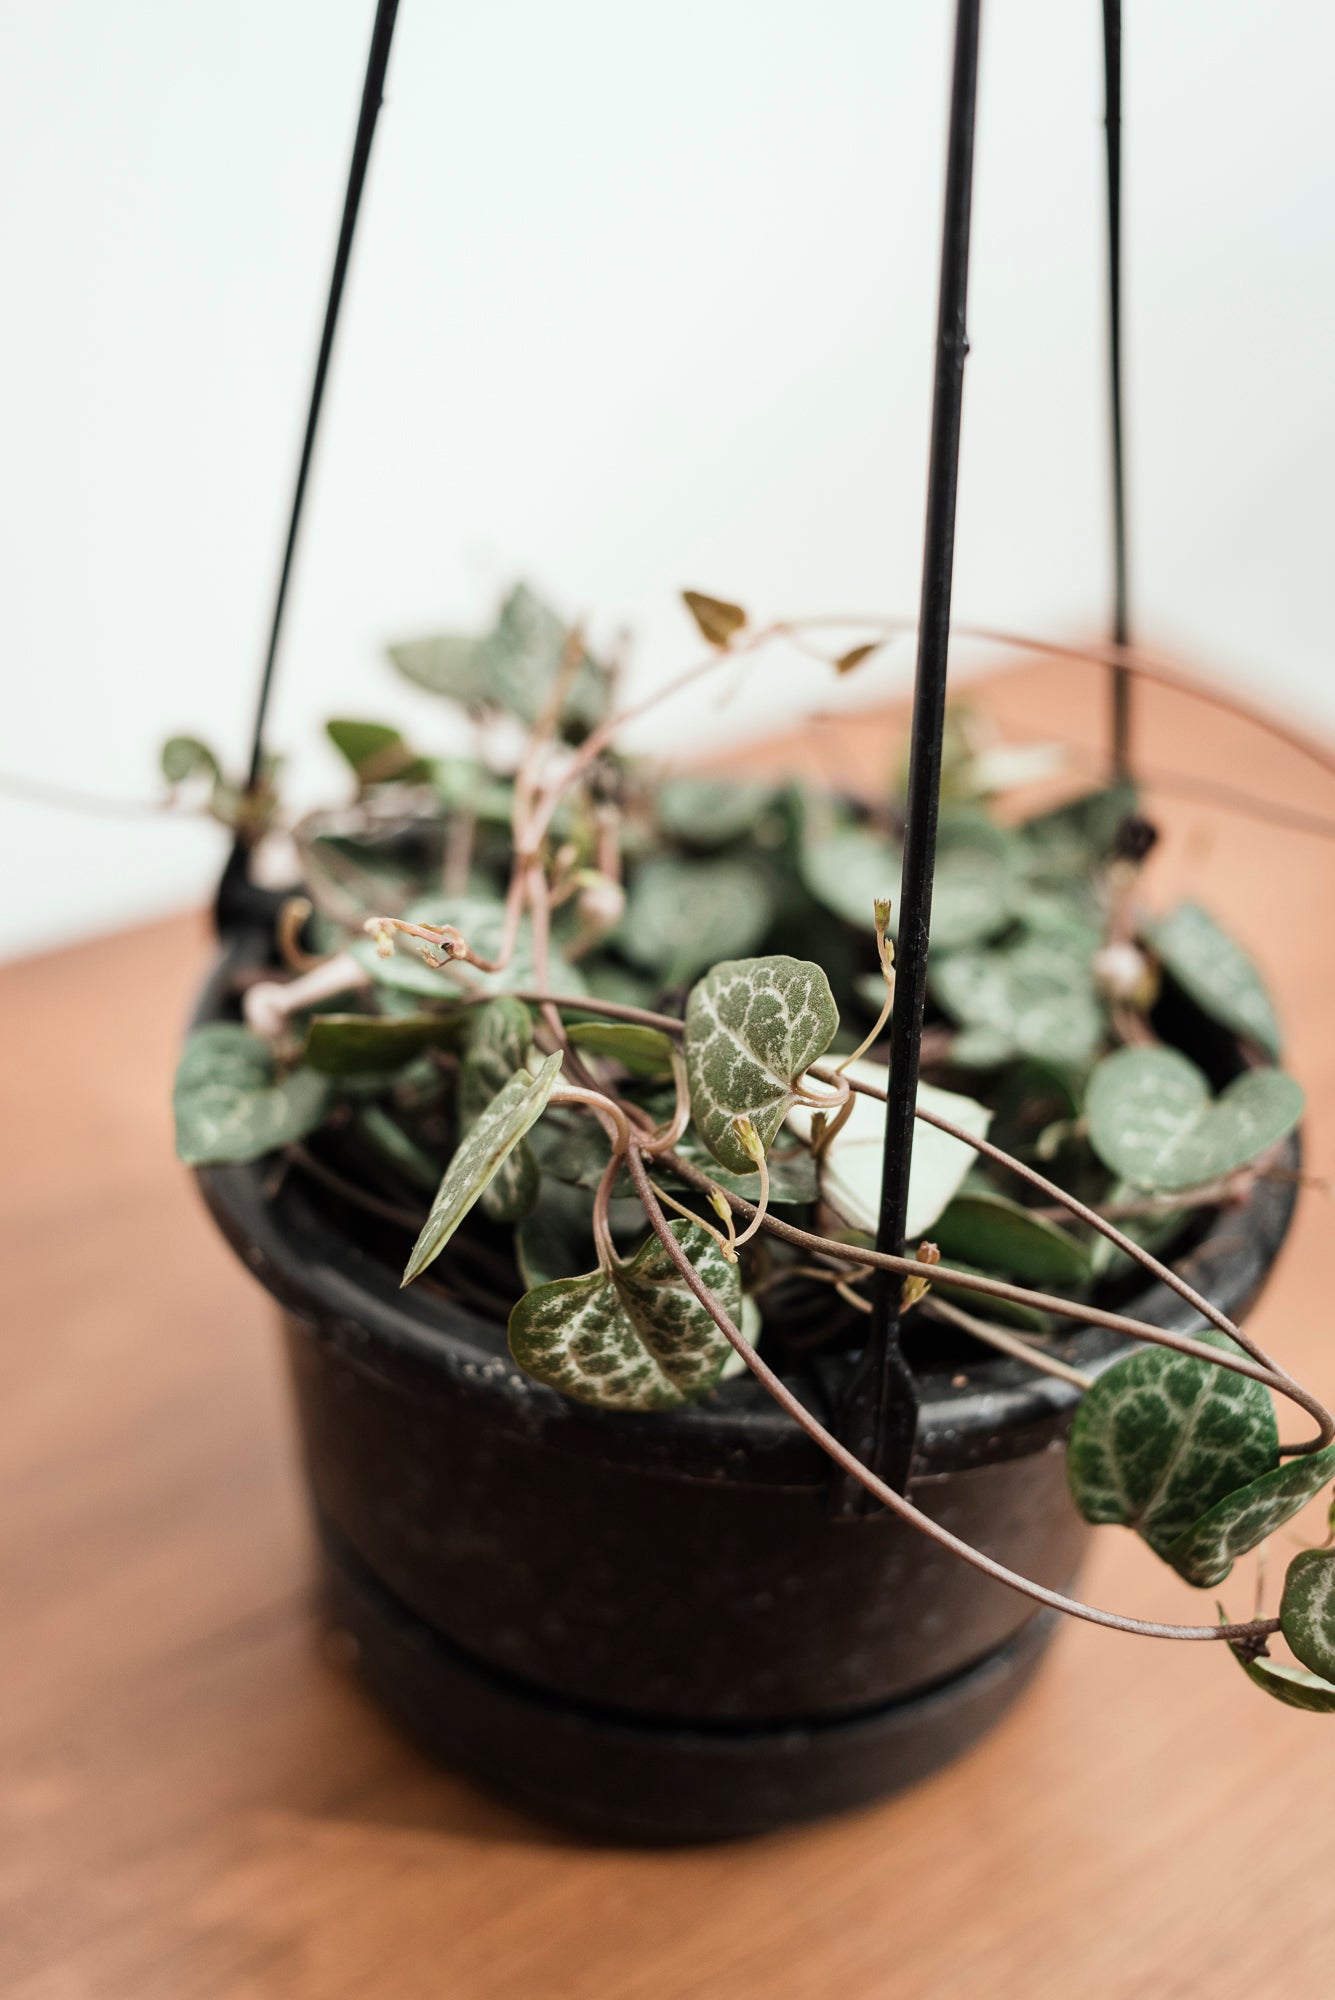 Ceropegia Woodii 'Chain of Hearts' 14cm Basket